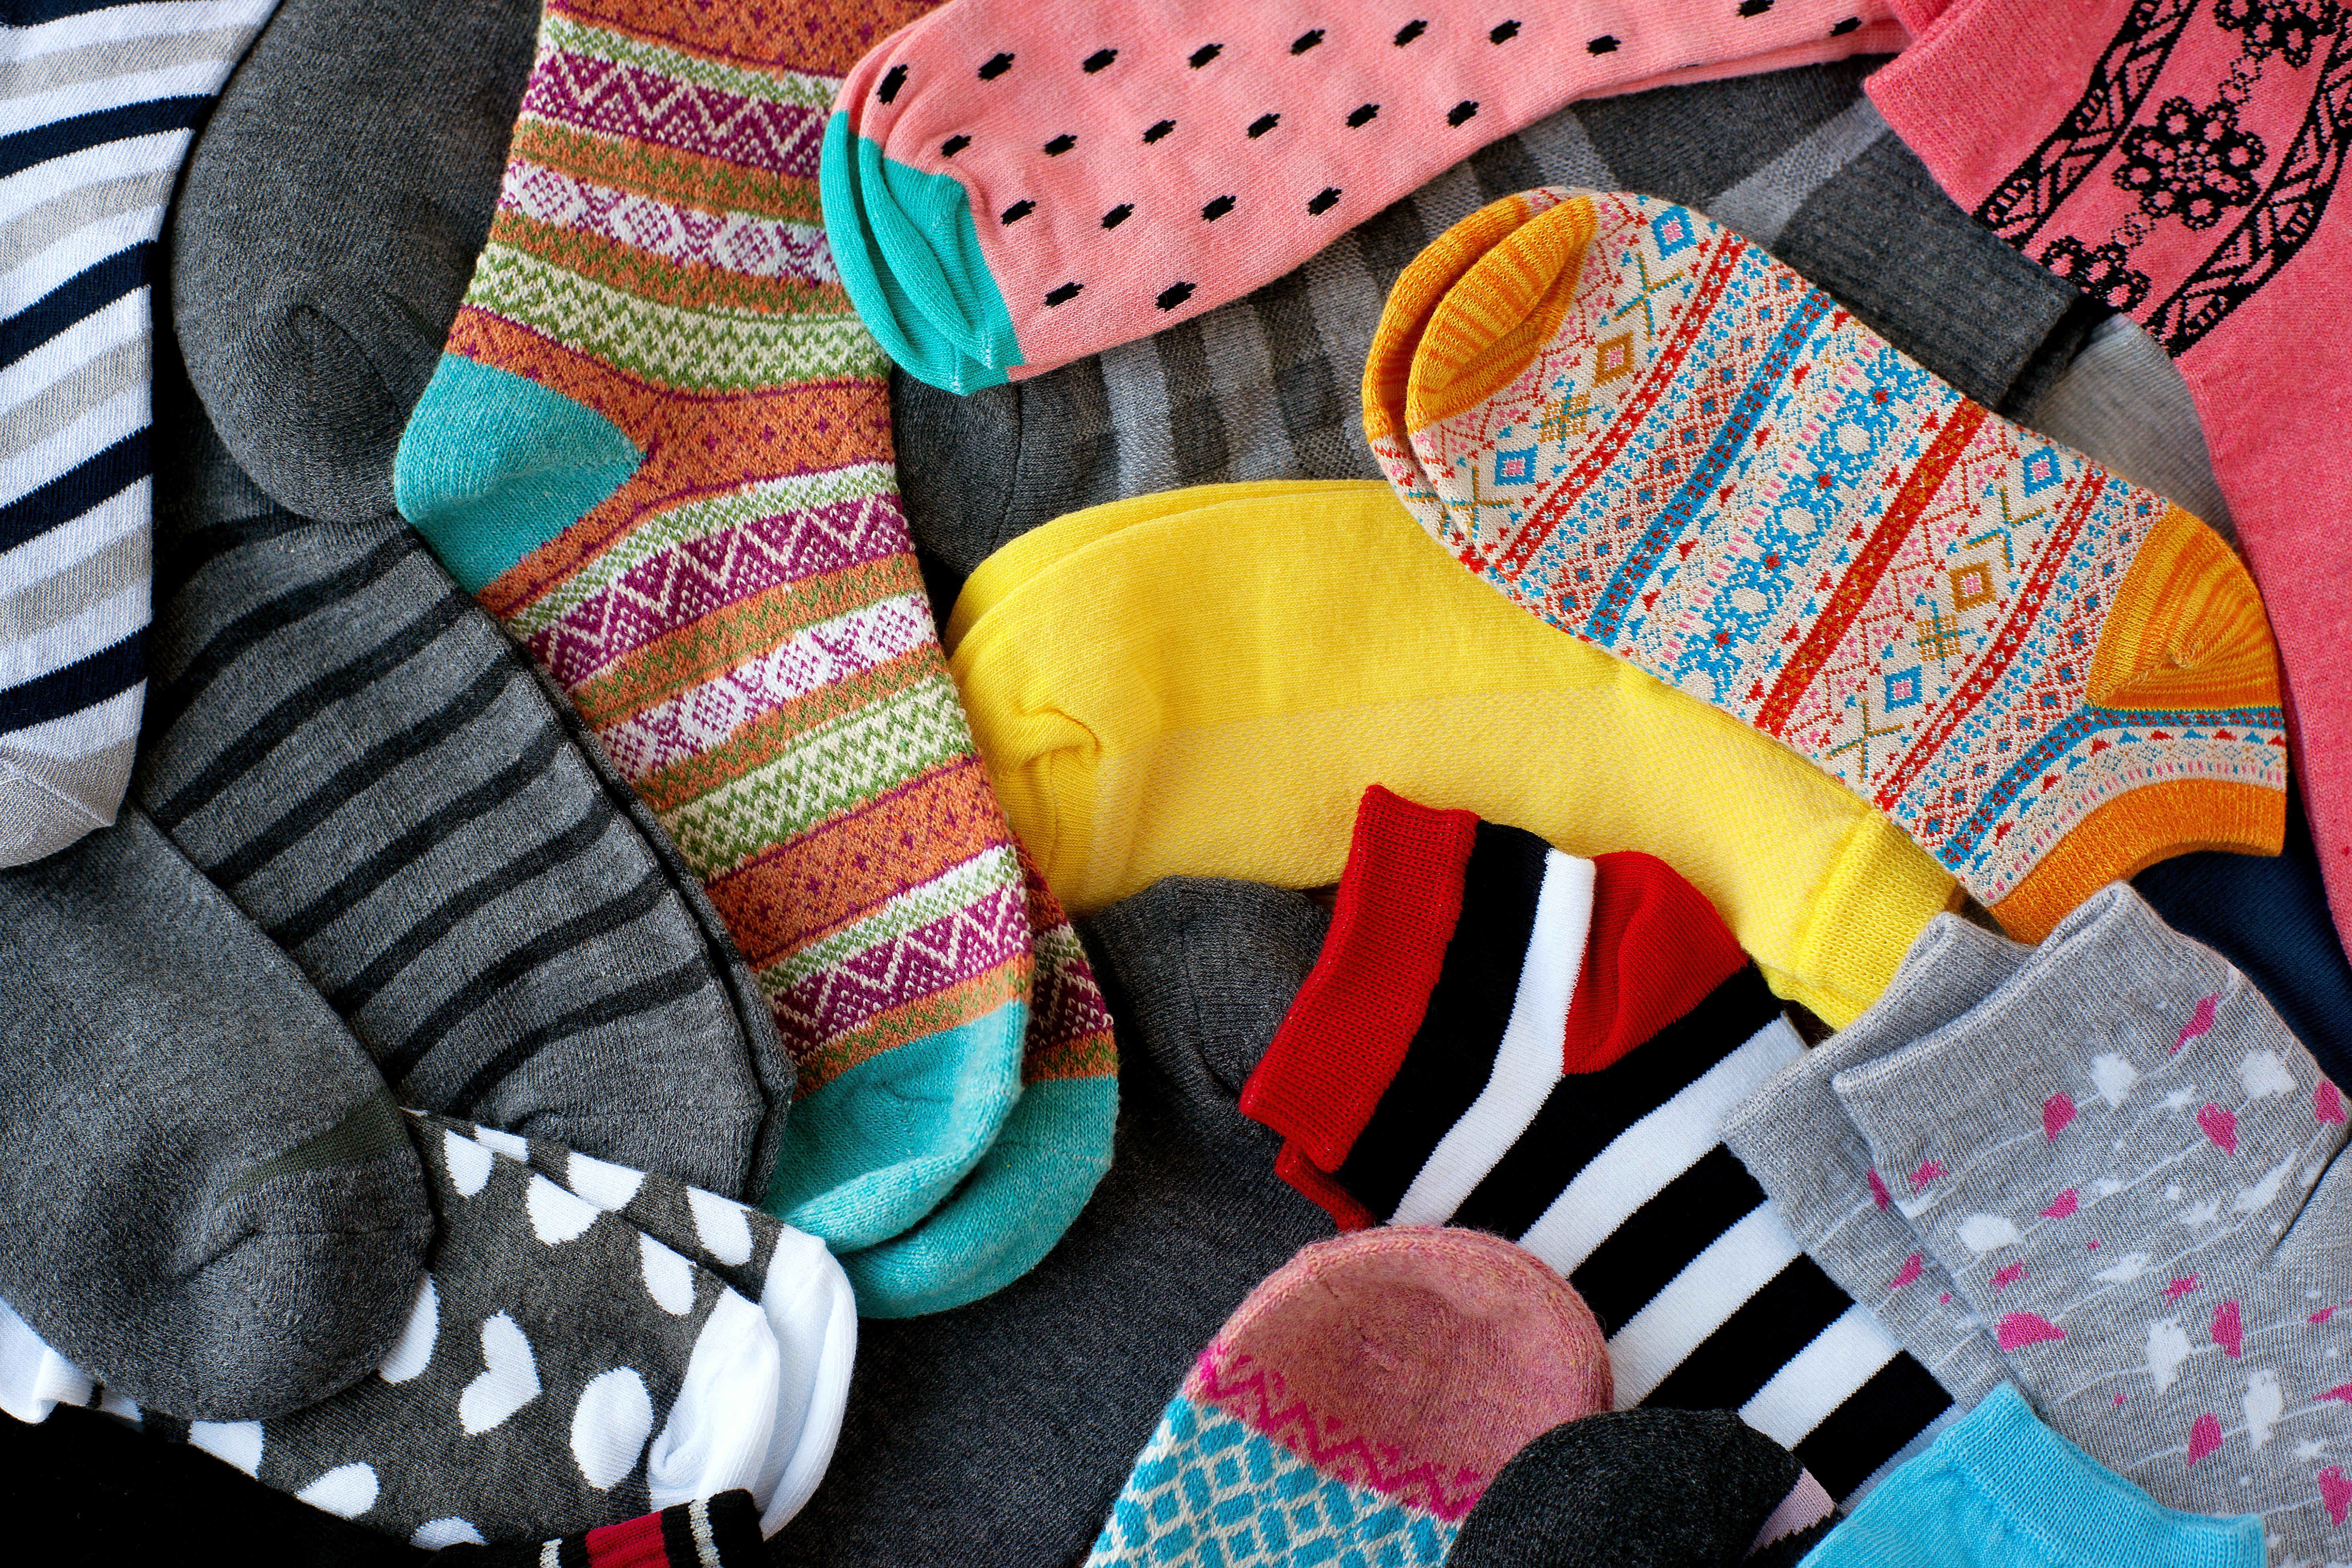 Livingston Parish Library participating in Sock It To Me! Sock Drive; donations going to Family Village